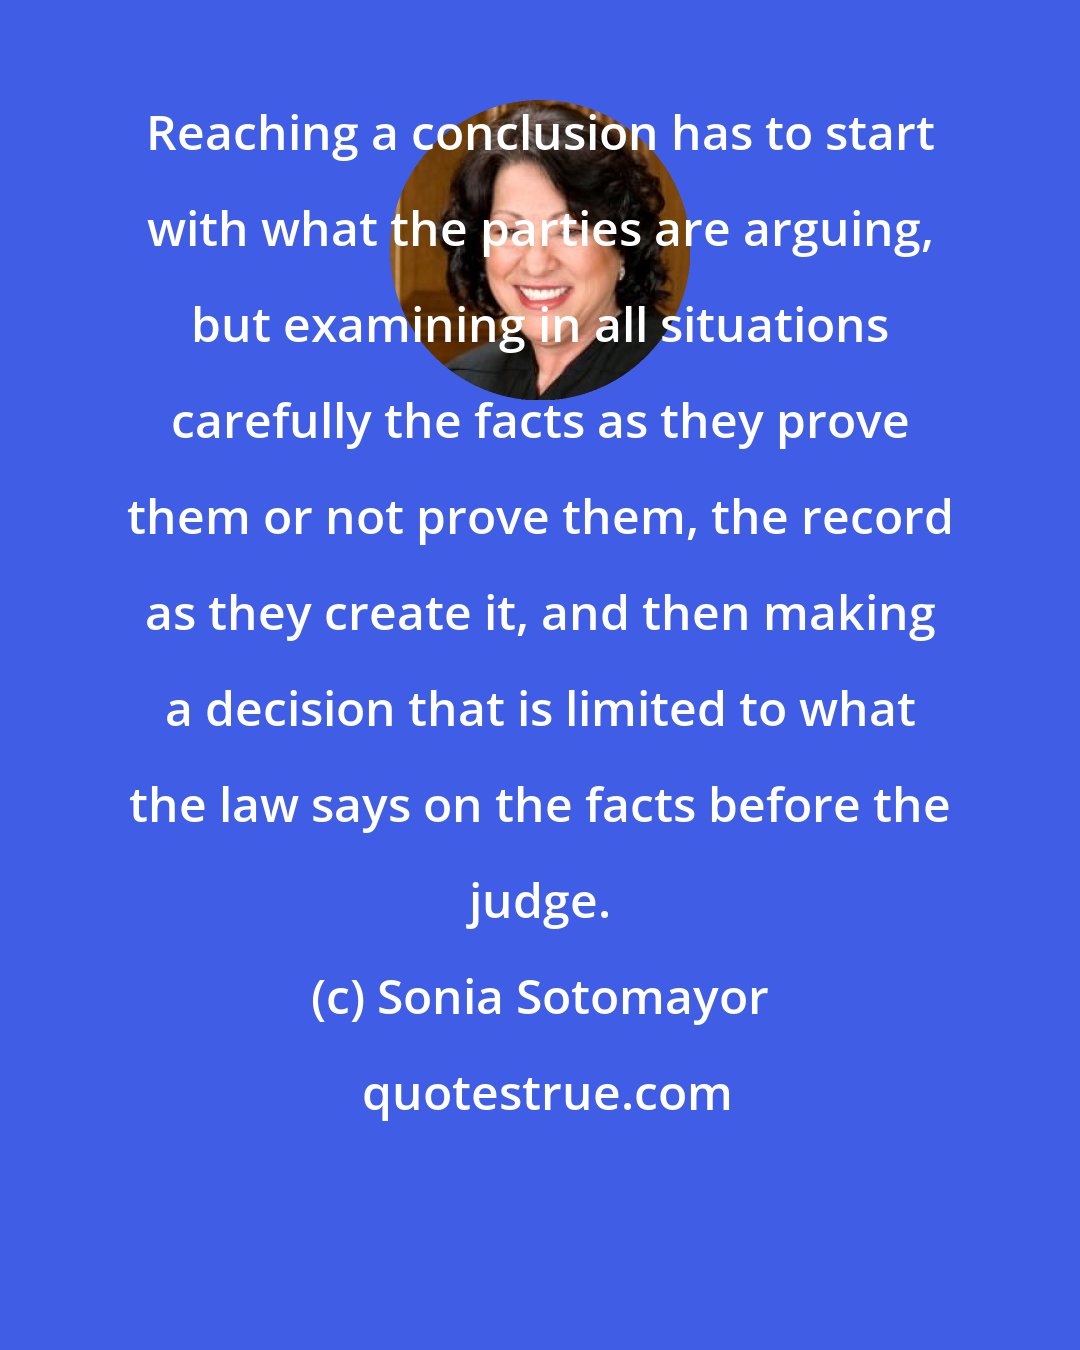 Sonia Sotomayor: Reaching a conclusion has to start with what the parties are arguing, but examining in all situations carefully the facts as they prove them or not prove them, the record as they create it, and then making a decision that is limited to what the law says on the facts before the judge.